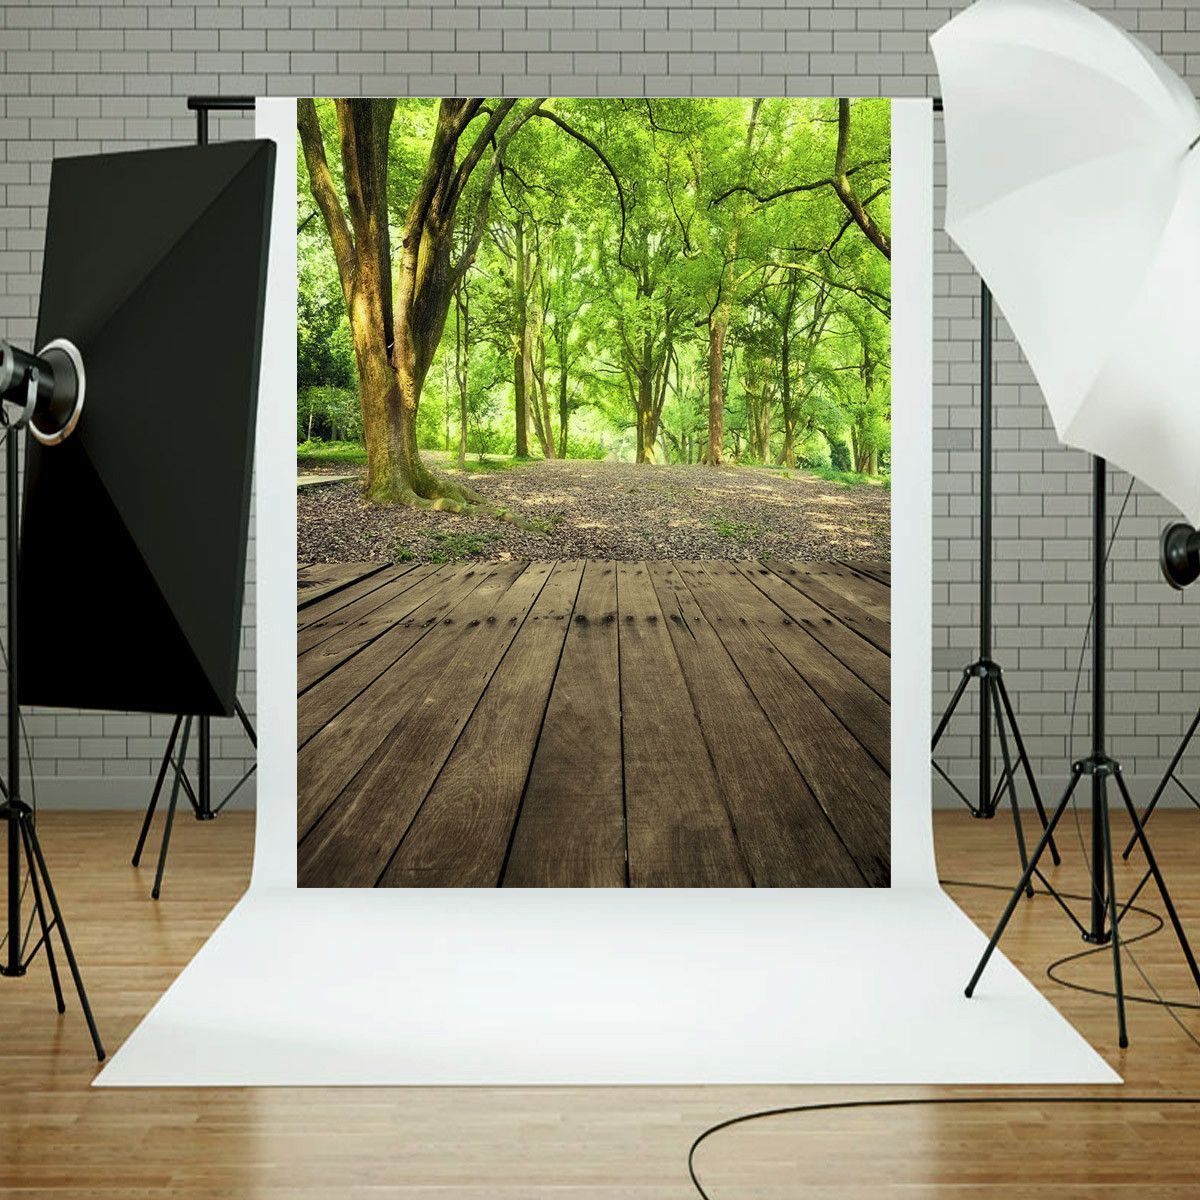 3x5FT-Forest-Scenery-Wood-Floor-Vinyl-Backdrop-Photography-Prop-Photo-Background-1252262